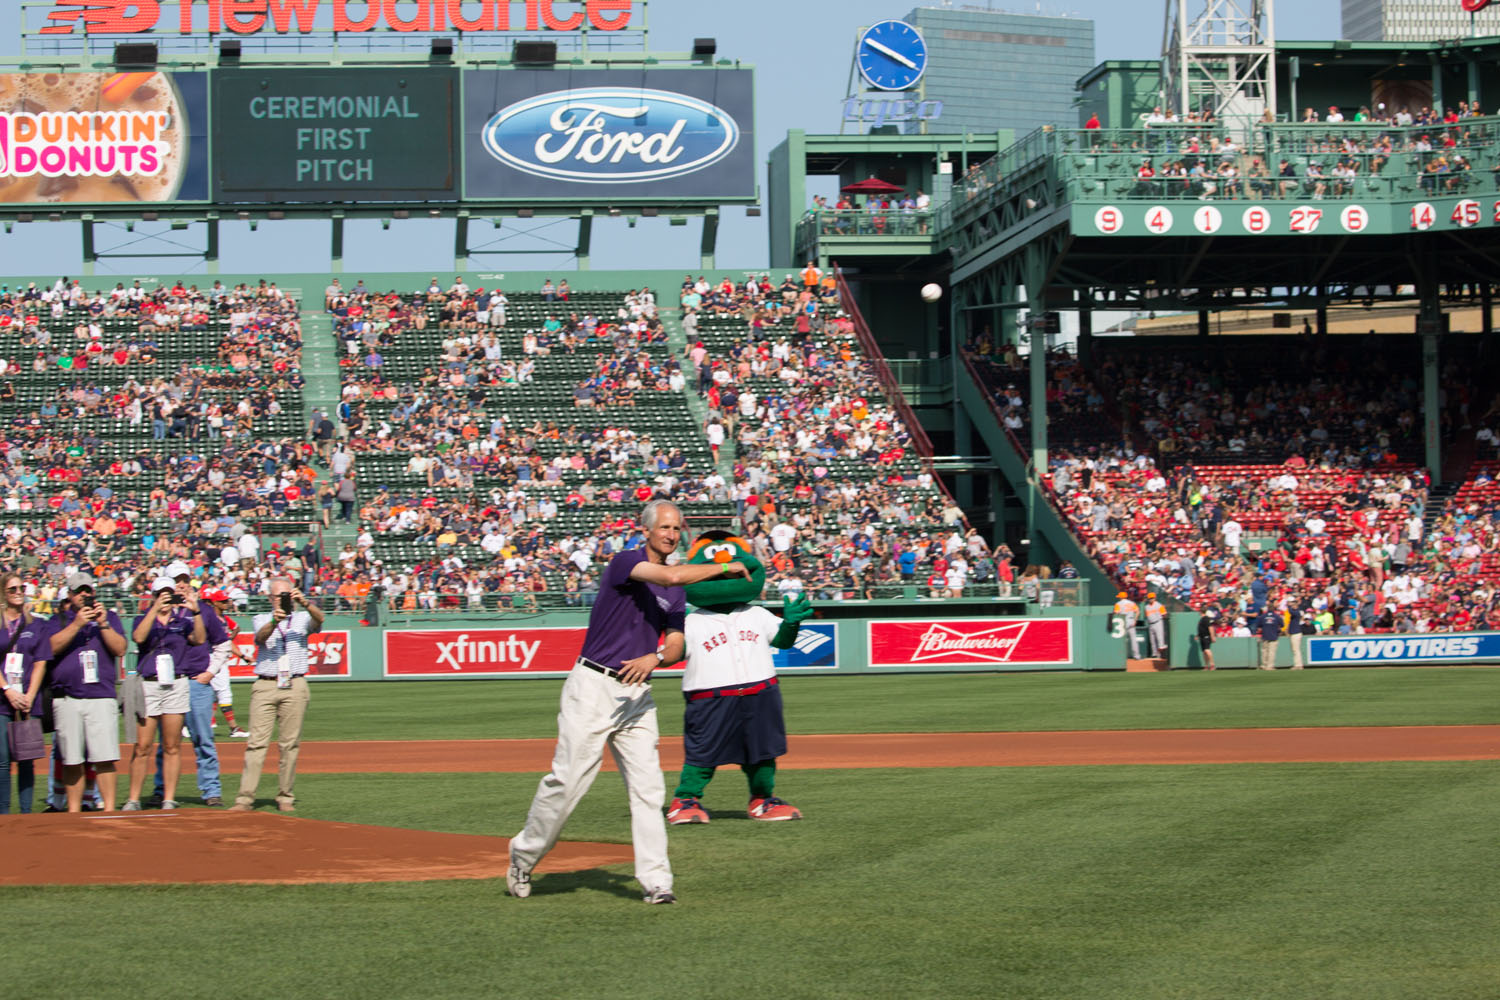 Howard Young Photo of Throwing The Ceremonial Pitch At The 2017 Boston Red Sox Game